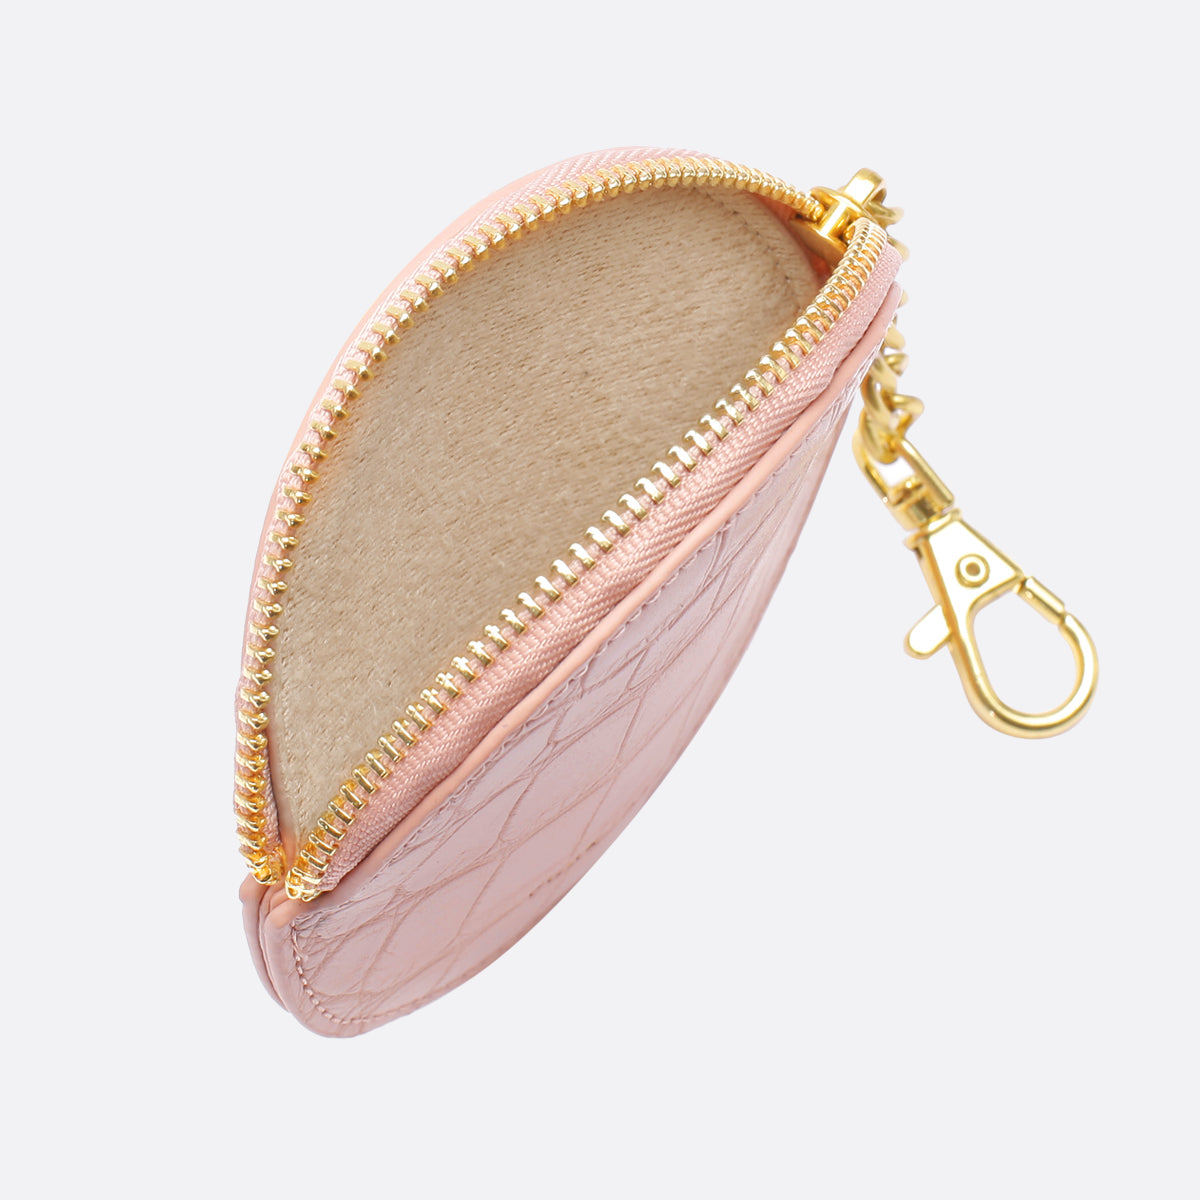 Pixie Mood Monica Pouch in Rose Croc